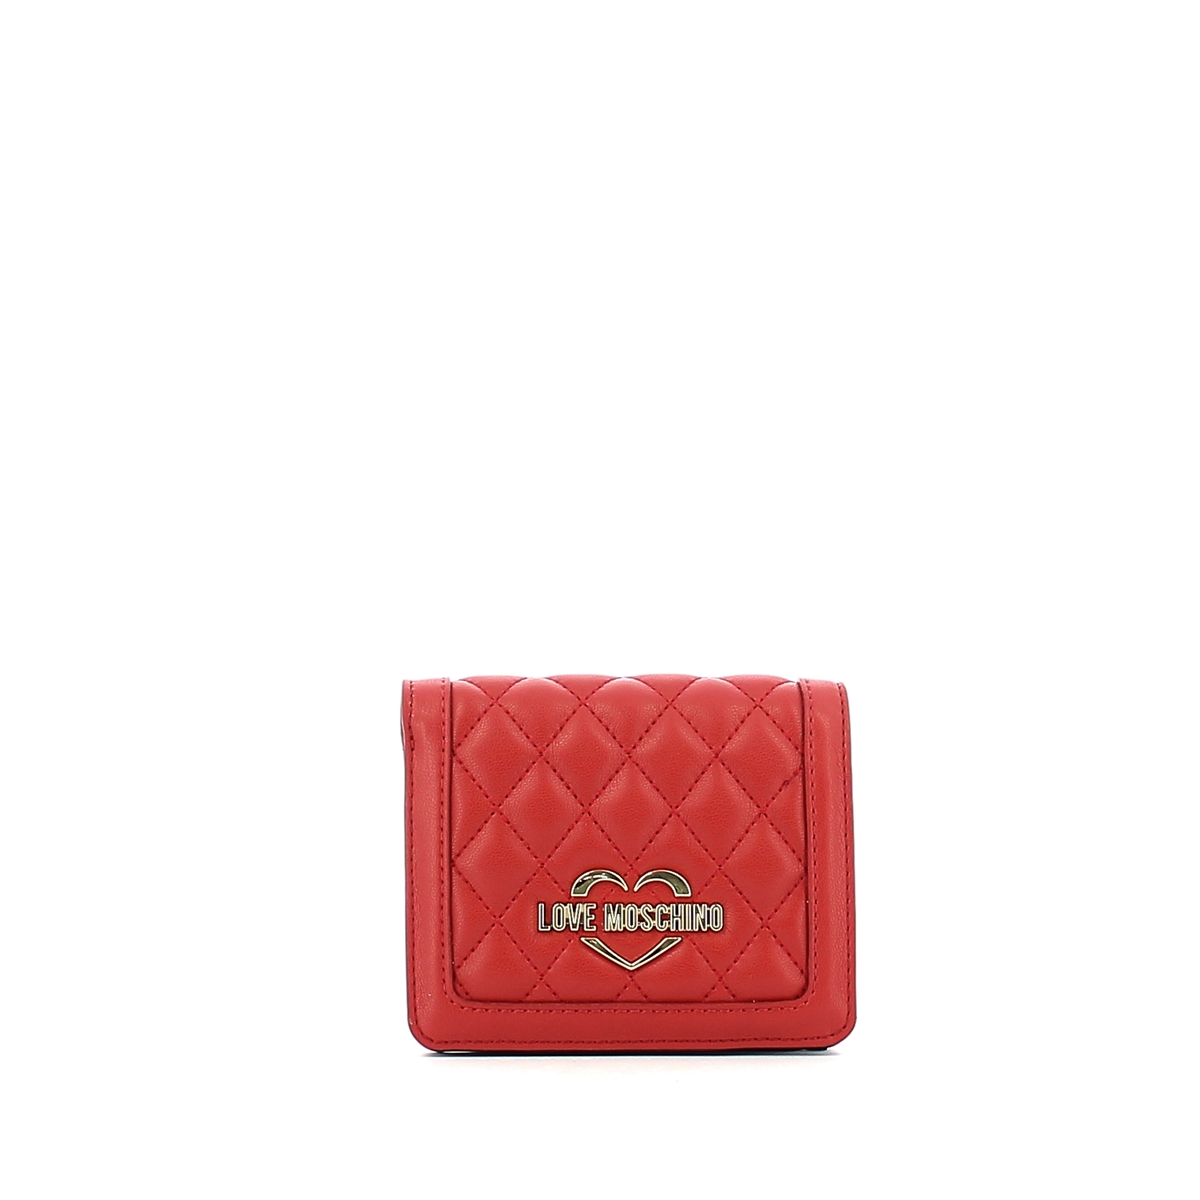 Wallet Love Moschino, woman accessory in fauxleather. | Bagalier.com